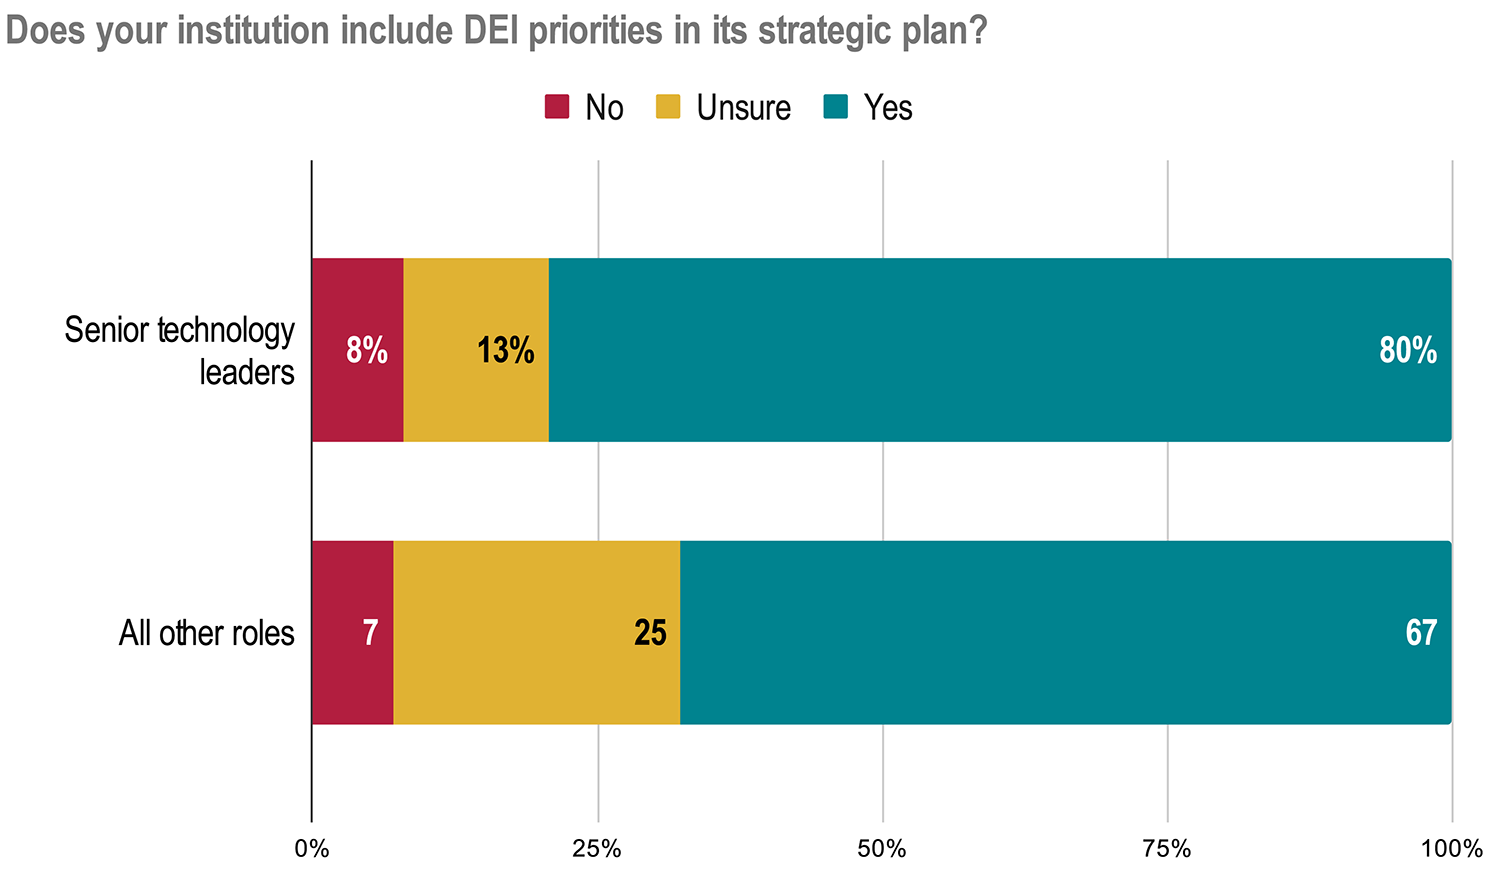 Does your institution include DEI priorities in its strategic plan? 
Senior technology leaders: No 8%, Unsure 13%, Yes 80%. 
All other roles: No 7%, Unsure 25%, Yes 67.